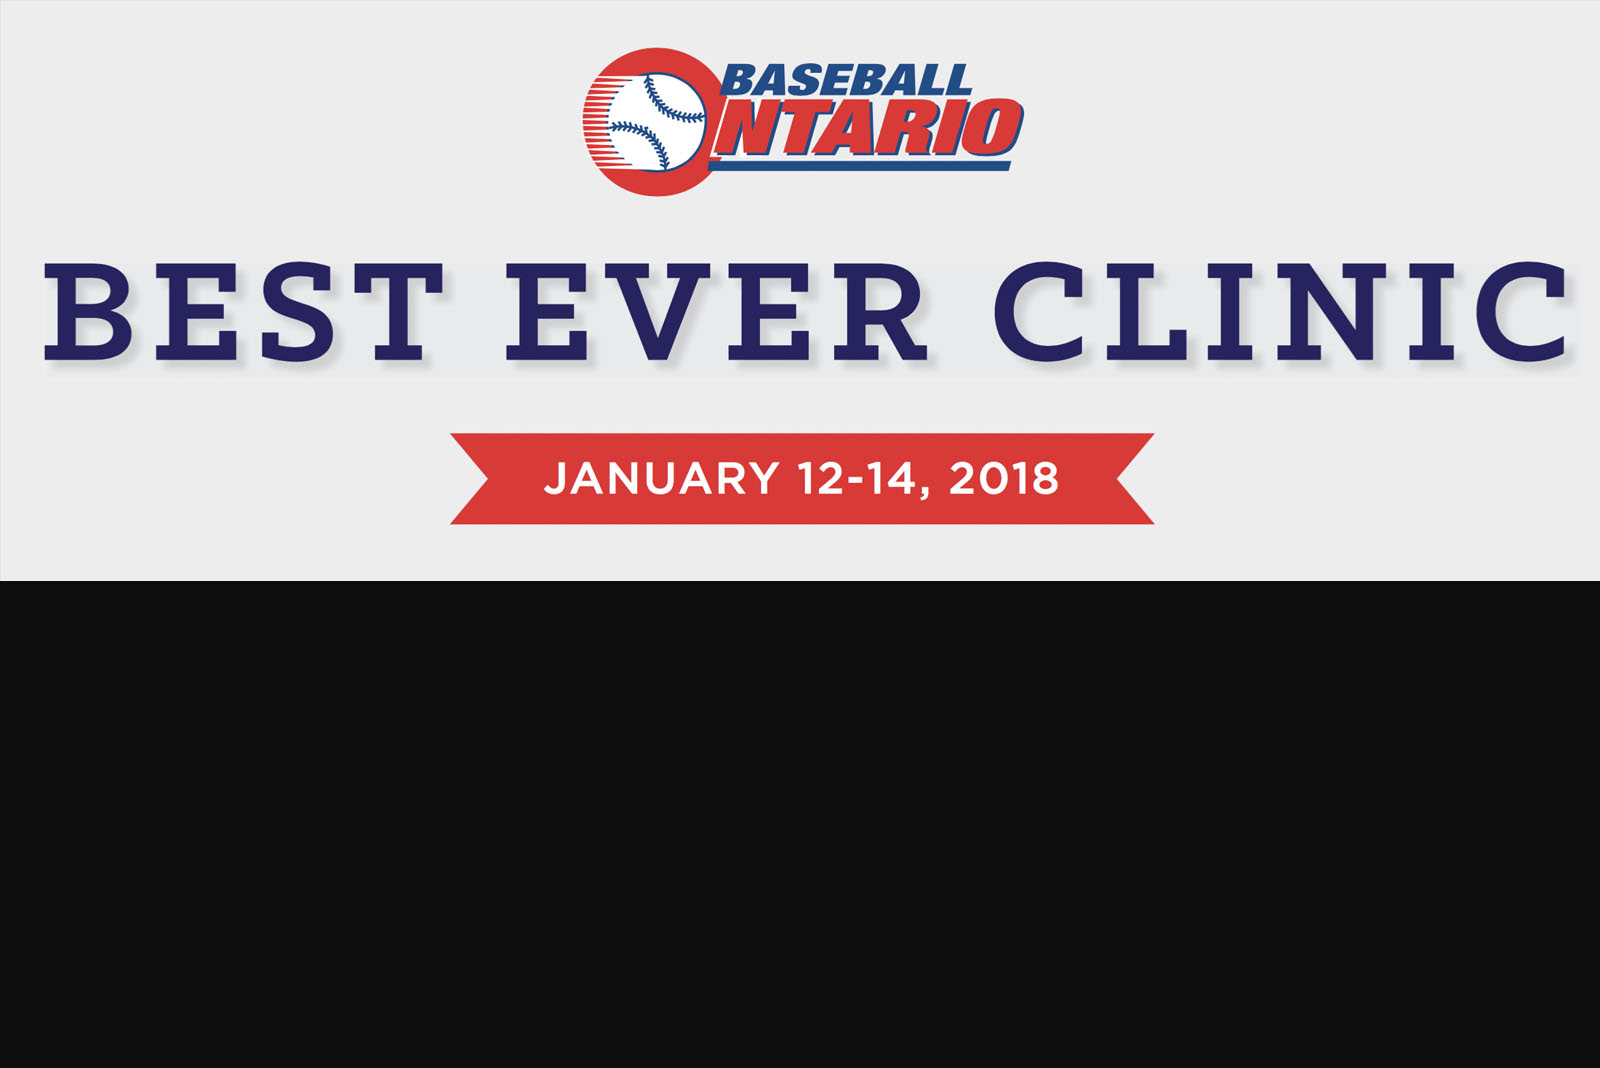 Coaches: 31st Annual Best Ever Clinic set for January 12 - 14